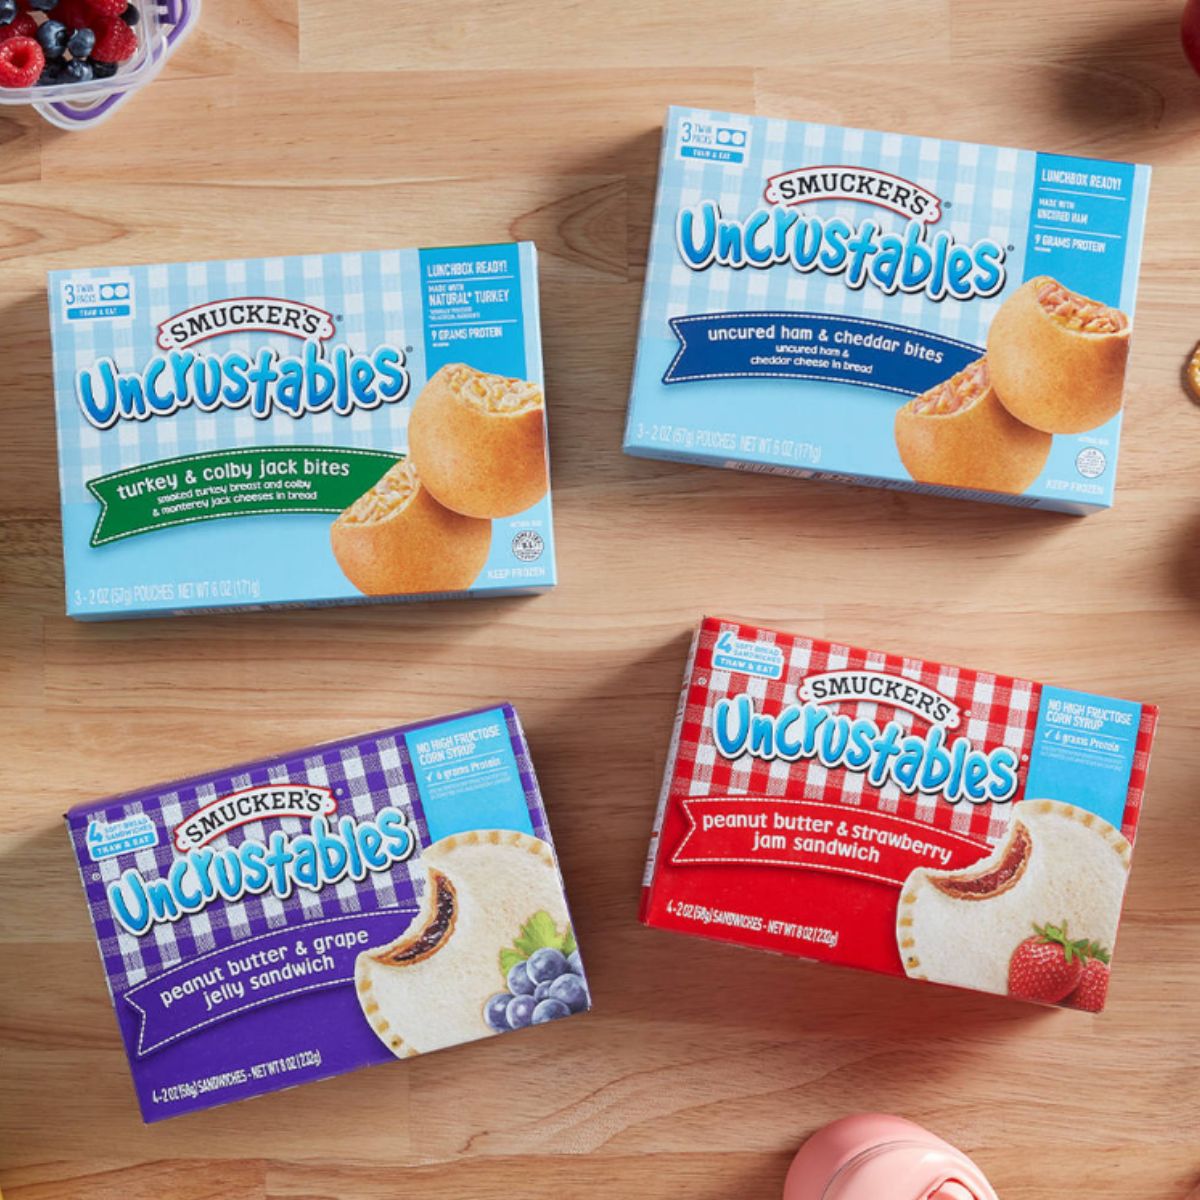 Four boxes of uncrustables on top of a kitchen counter.